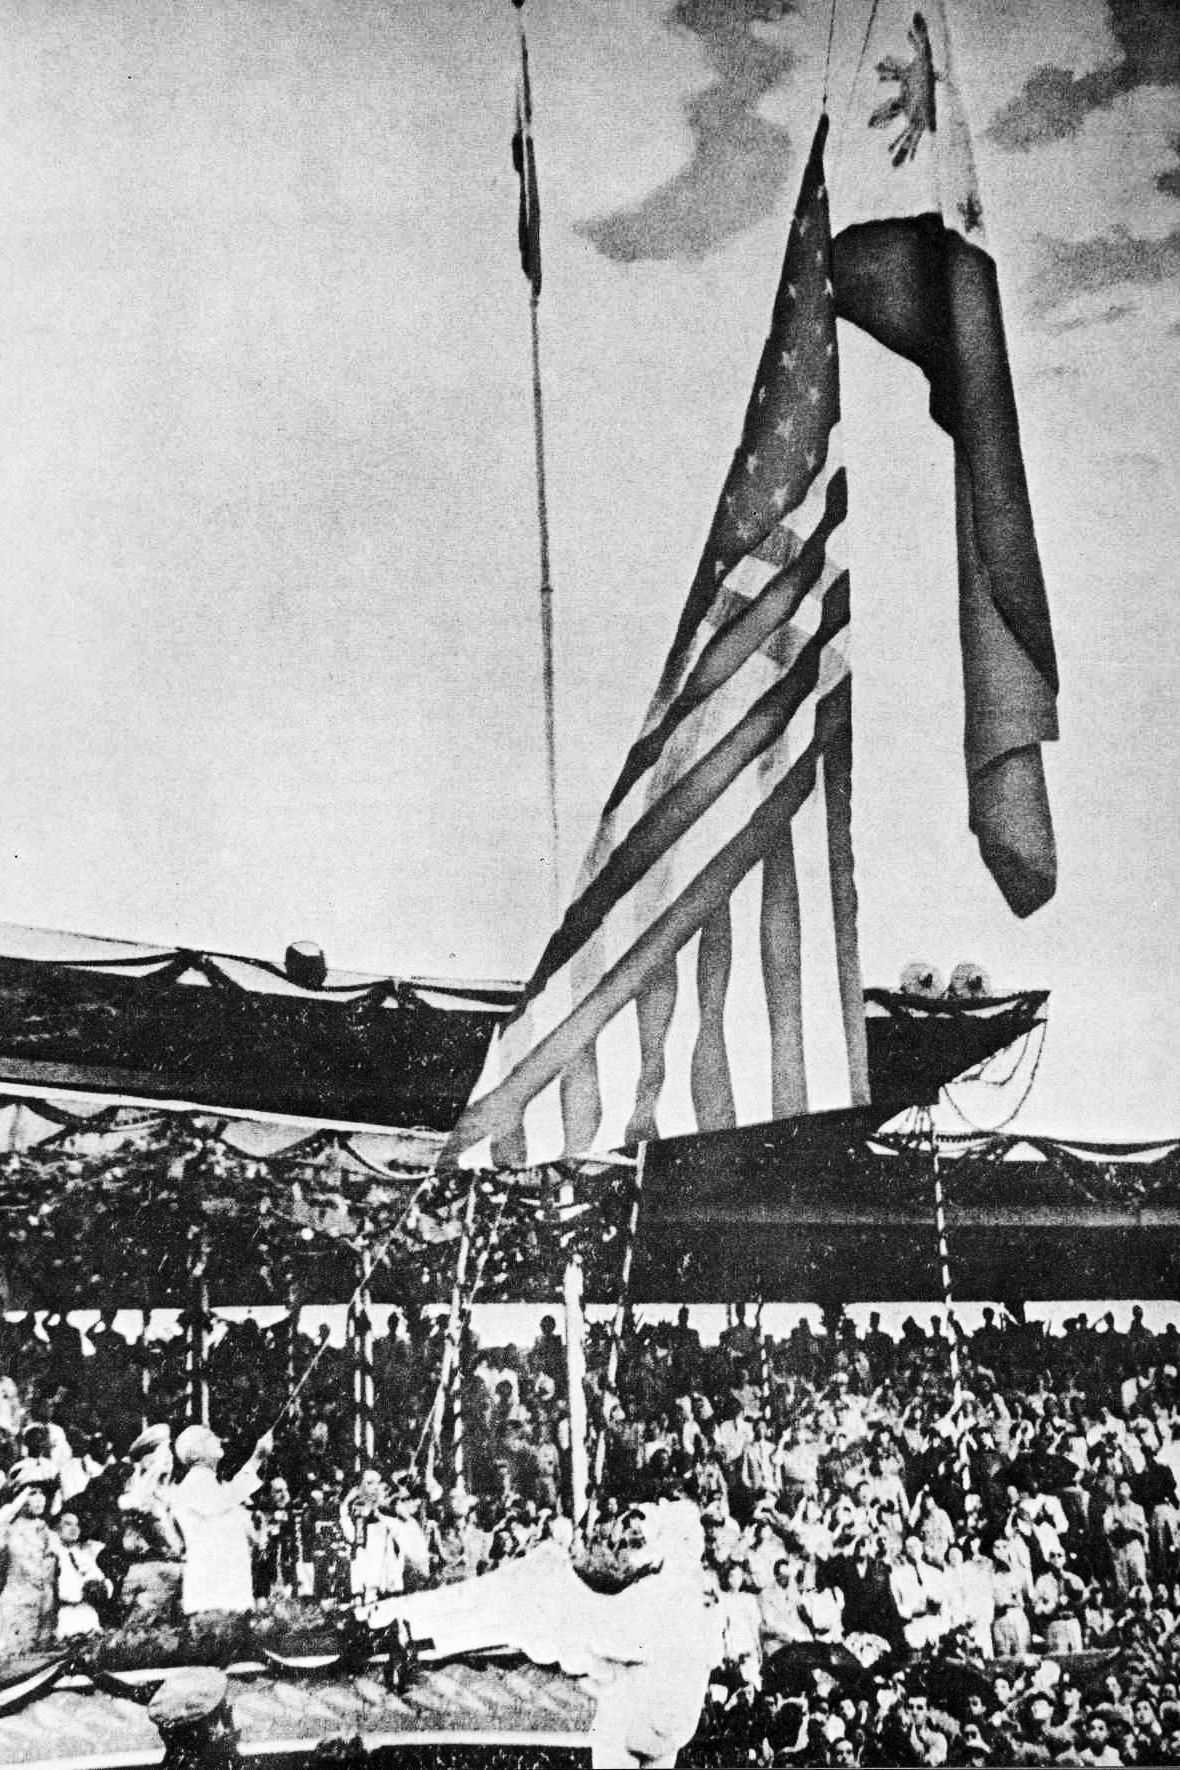 Photo of American flag being lowered while the Philippine flag raises over a crowd in a park